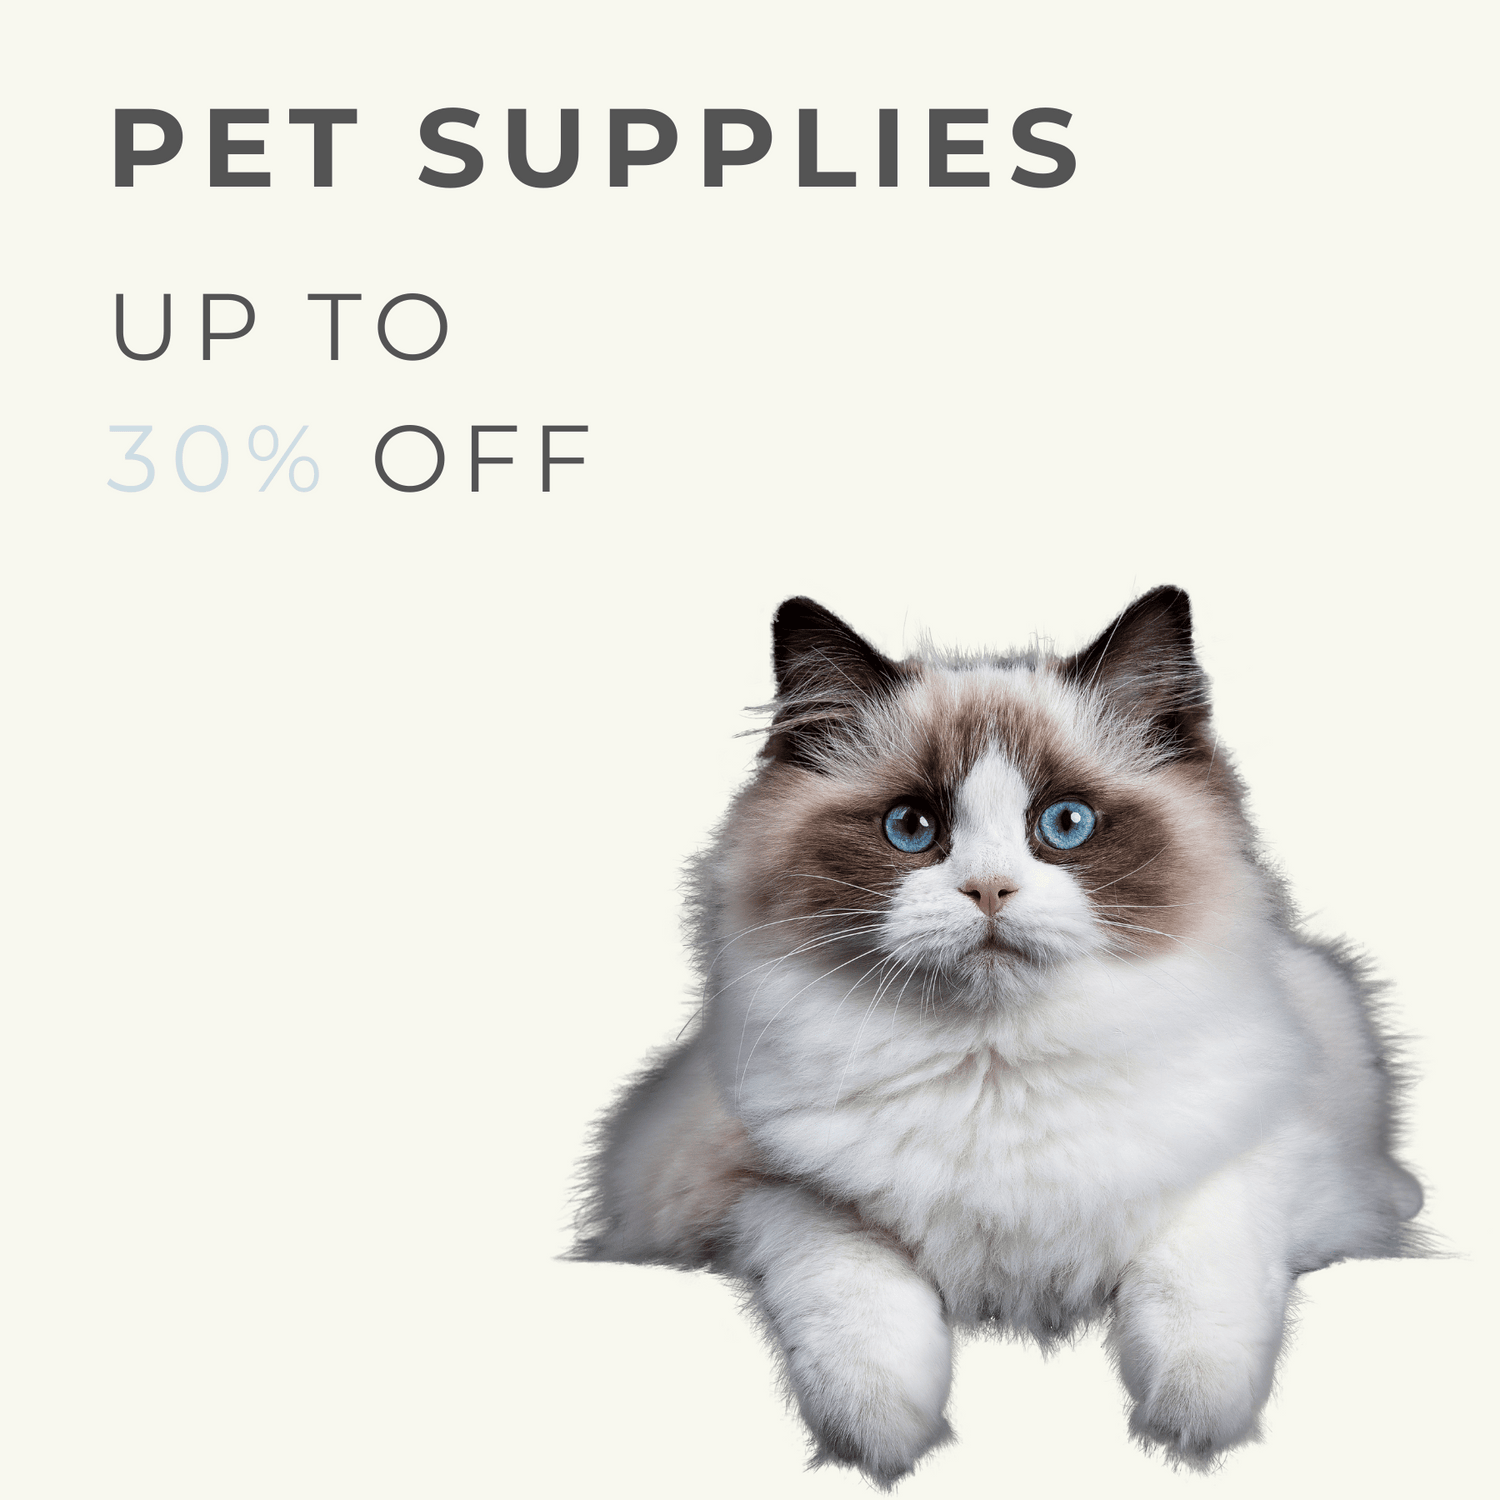 An adorable Ragdoll cat with striking blue eyes prominently in the foreground, with bold text above reading 'PET SUPPLIES UP TO 30% OFF', announcing a discount on pet products.